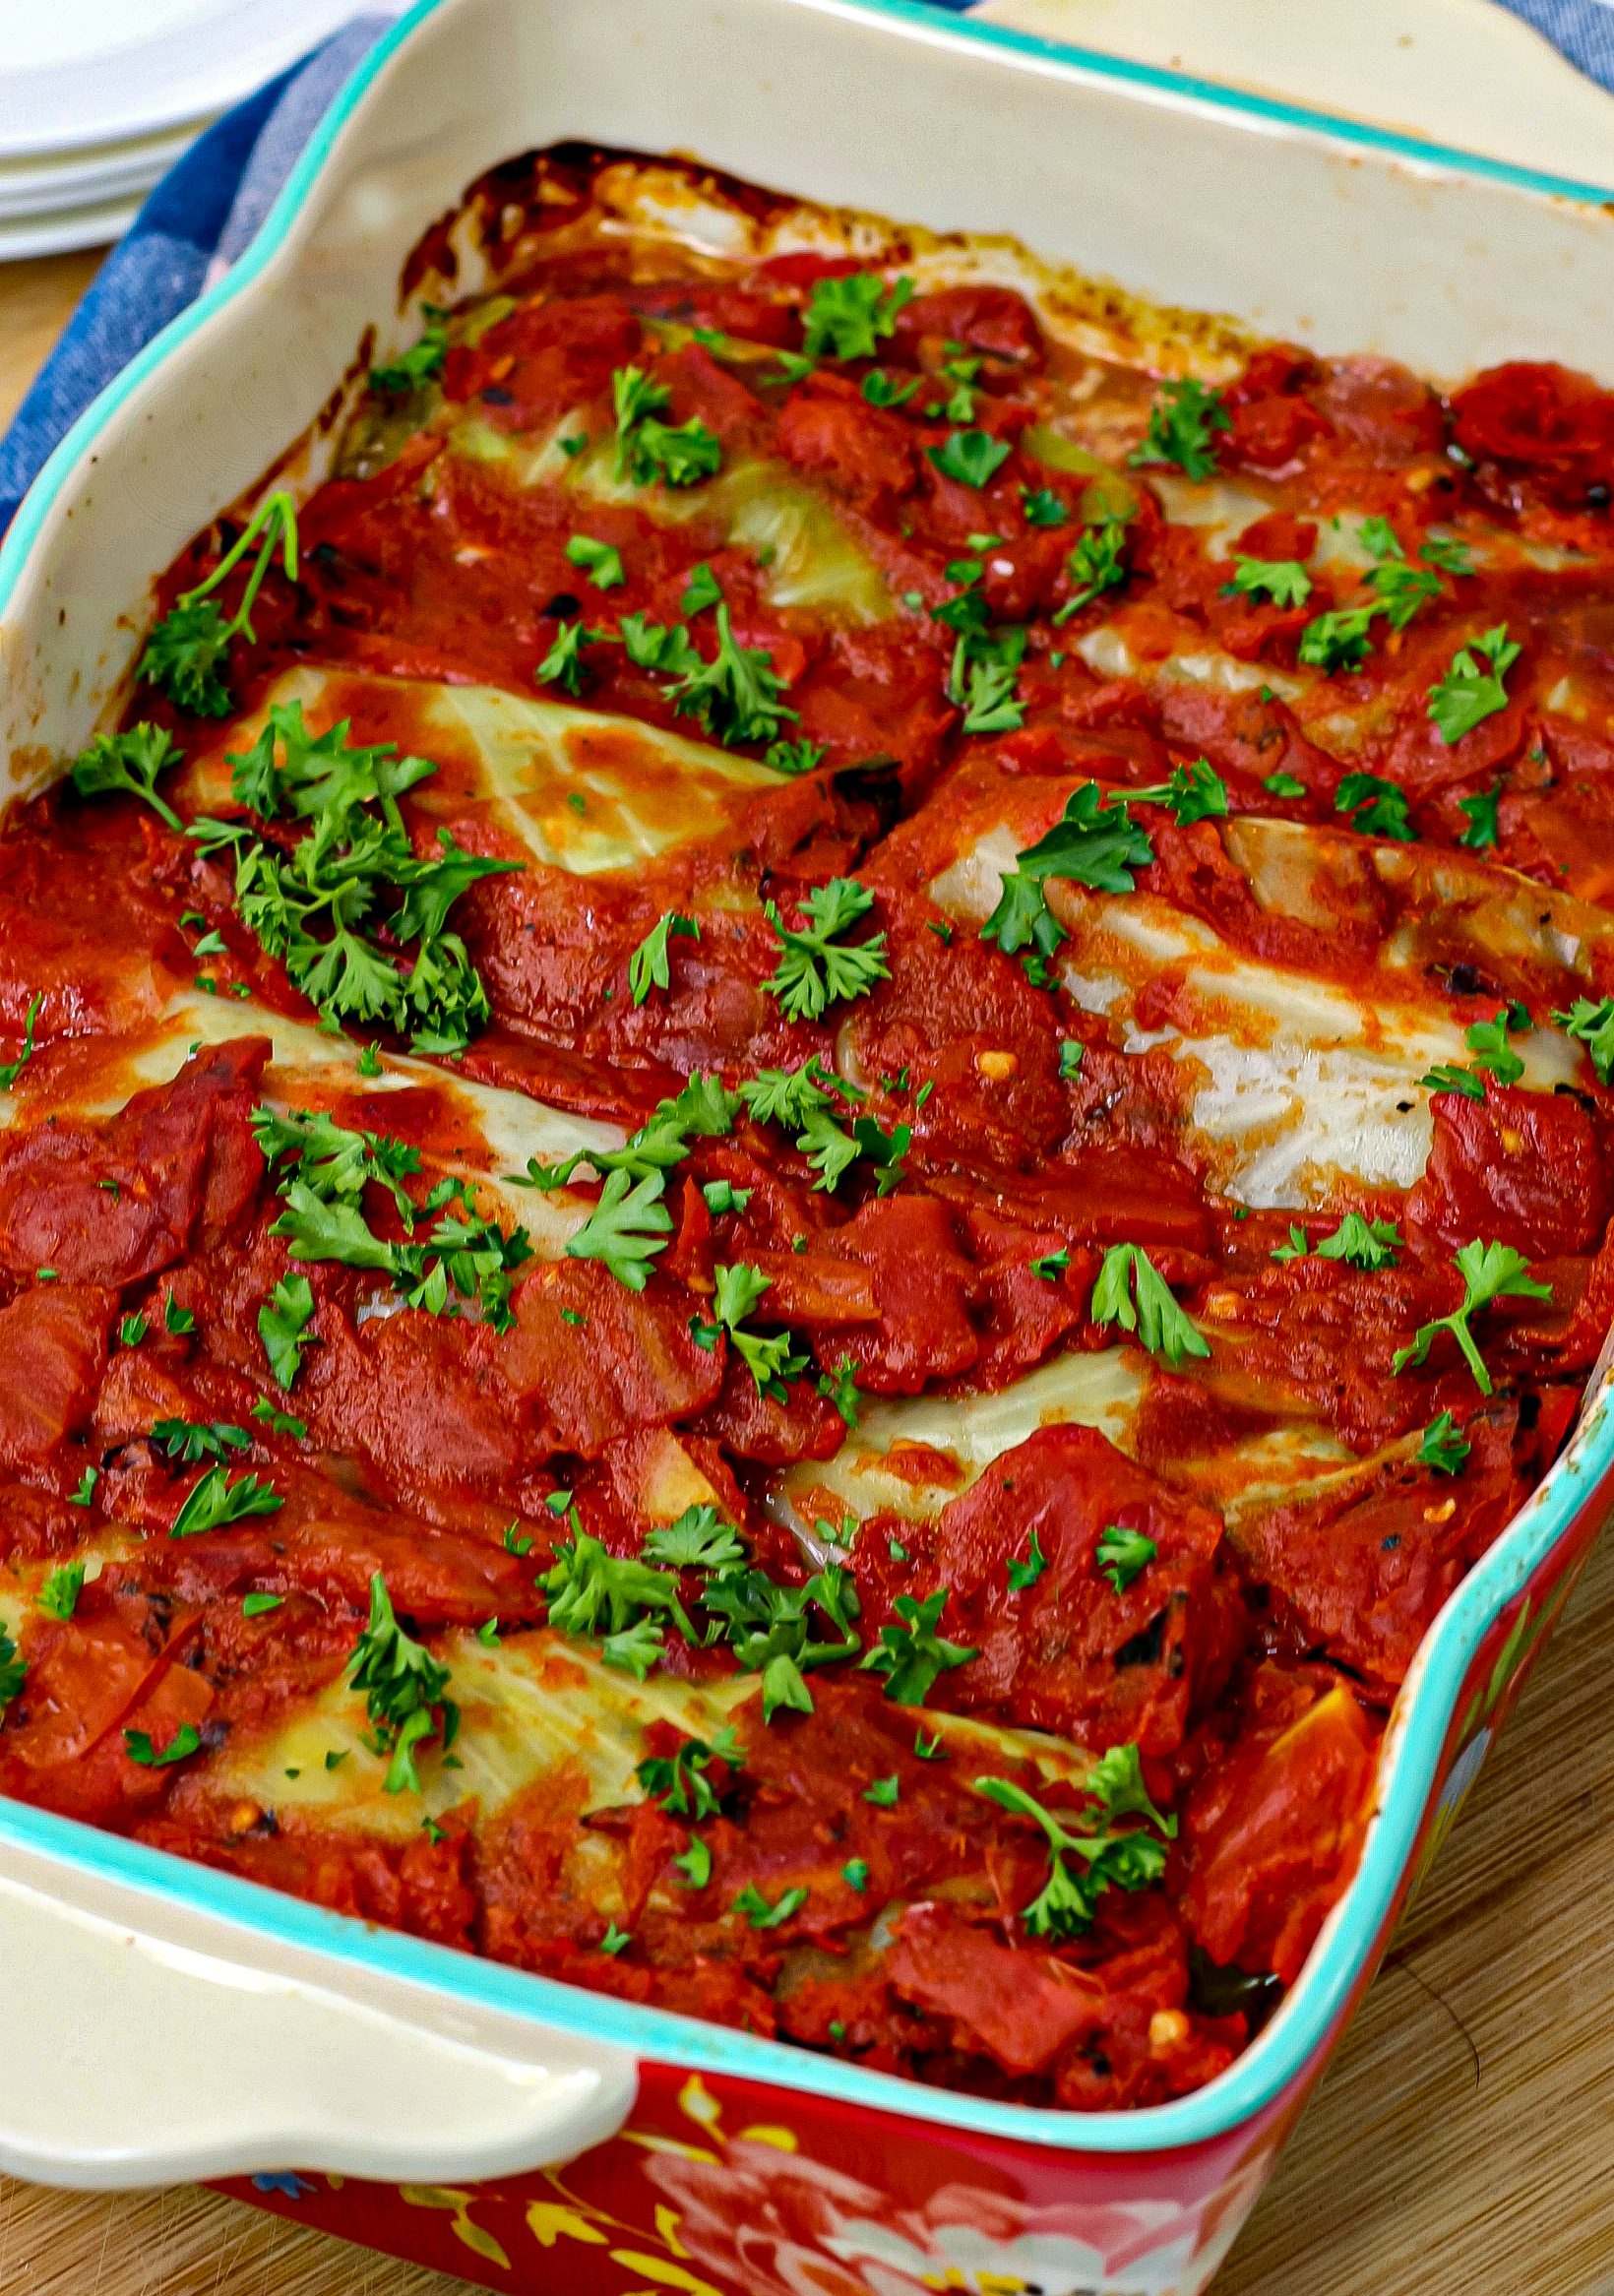 Stuffed Cabbage Rolls, baked stuffed cabbage rolls, stuffed cabbage in oven, stuffed cabbage rolls recipe in oven